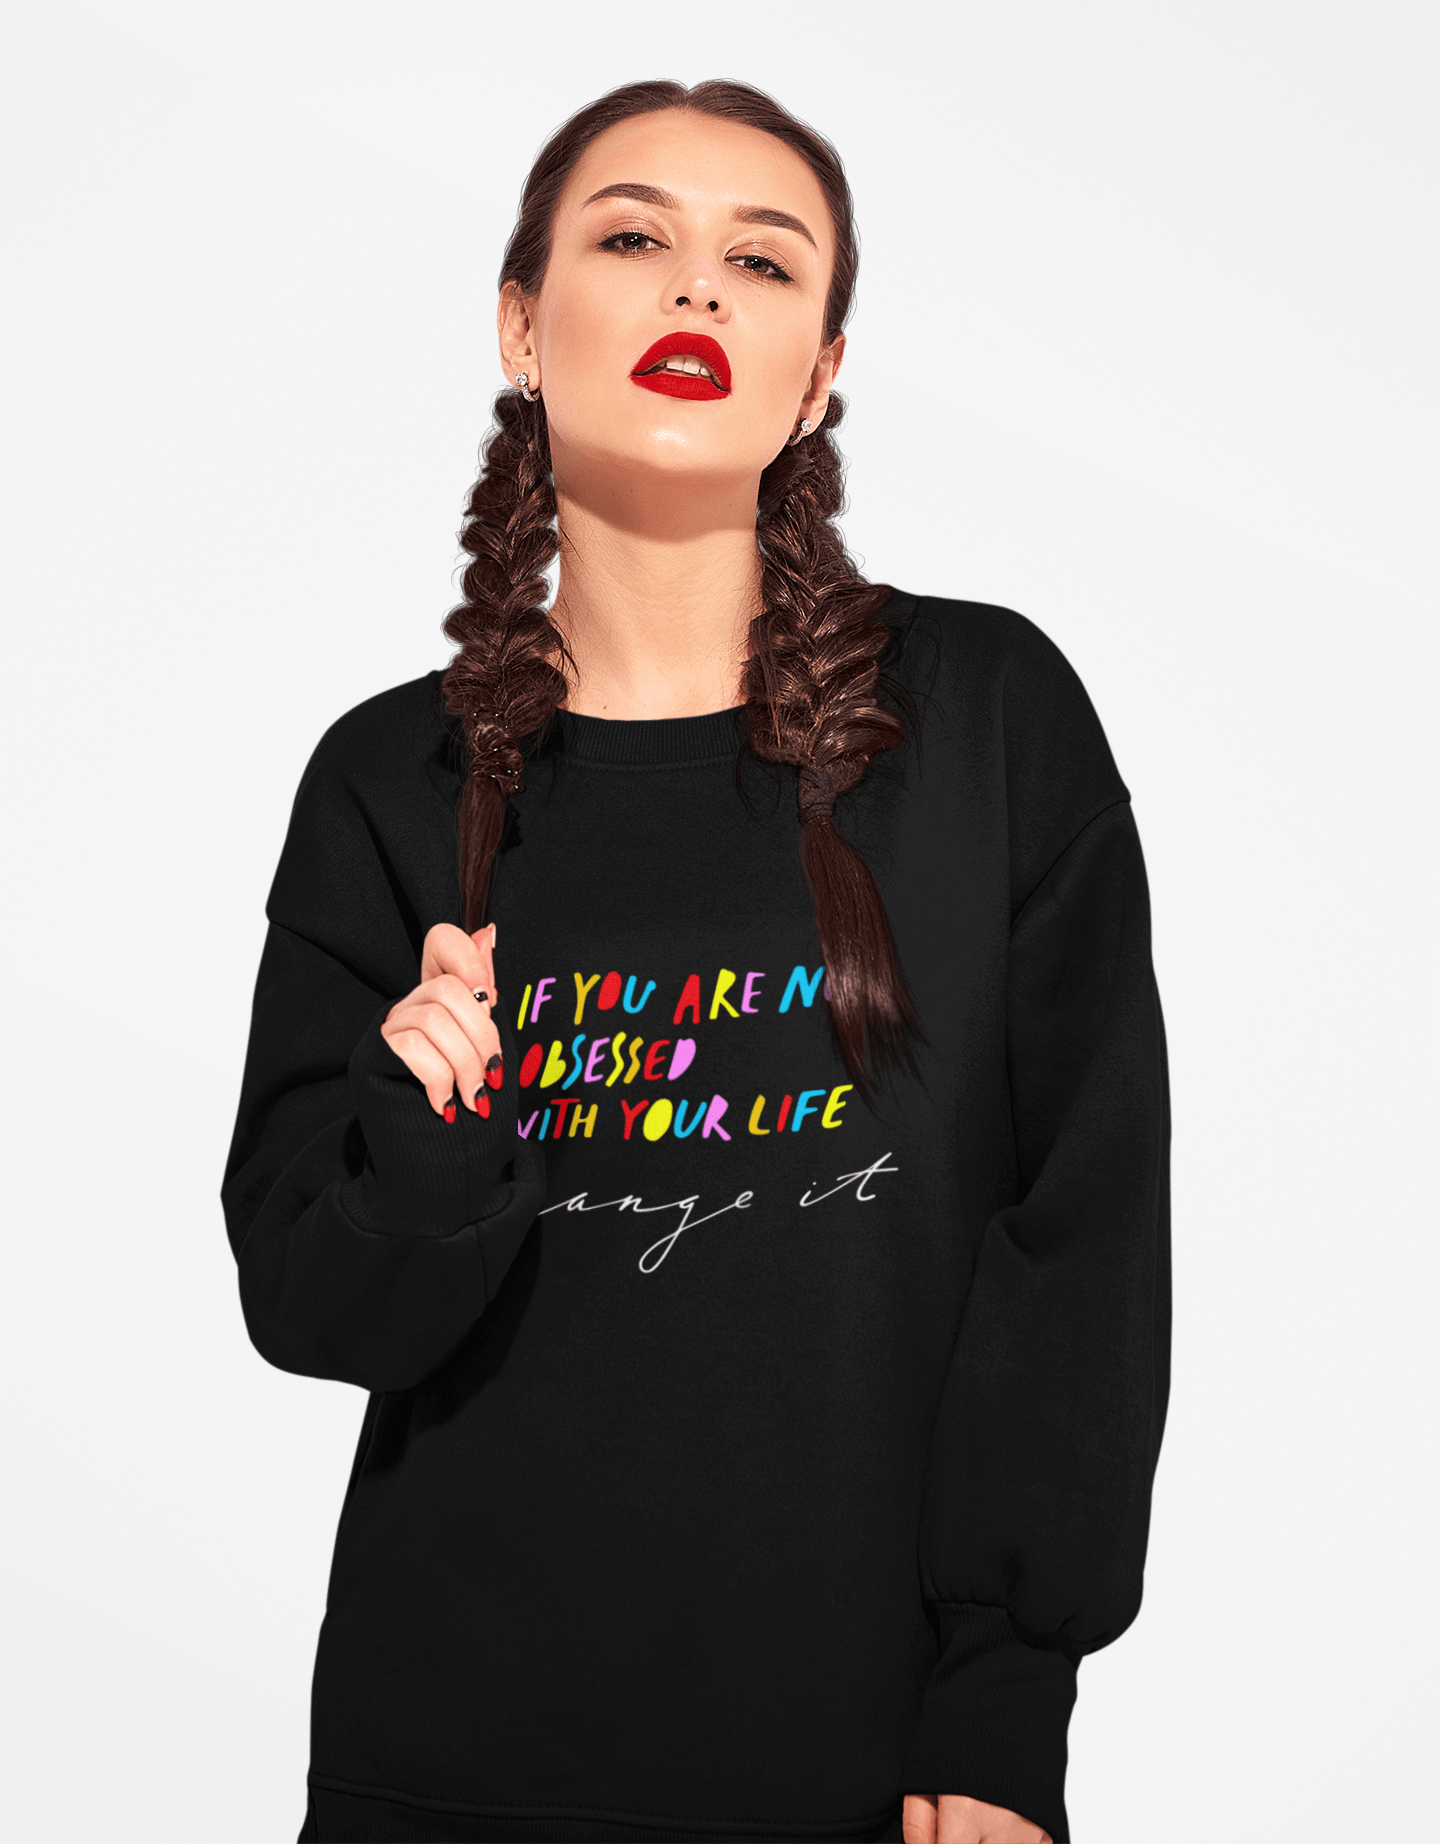 Change Your Life Unisex Fleece Sweatshirt - The Kindness Cause gifts that donate to a cause